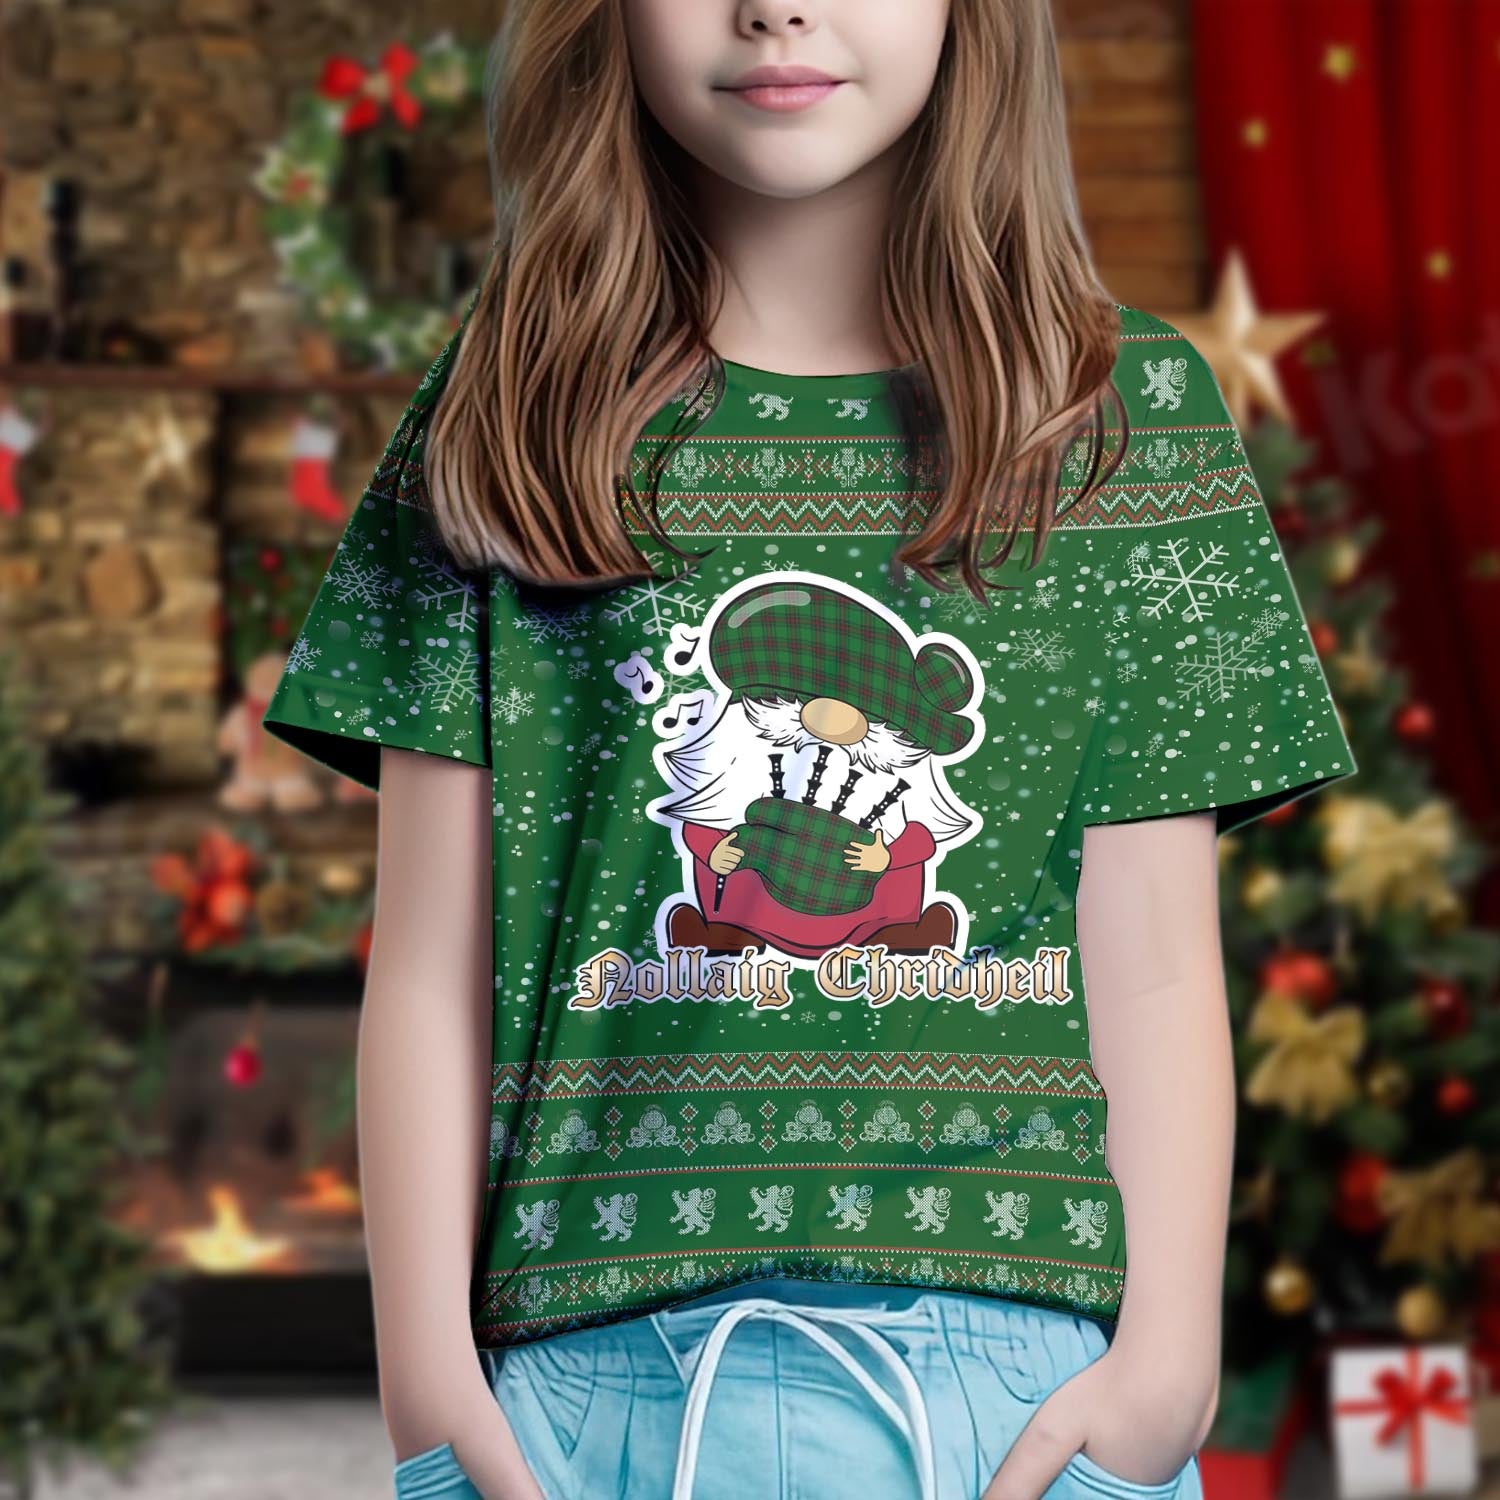 Halkerston Clan Christmas Family T-Shirt with Funny Gnome Playing Bagpipes Kid's Shirt Green - Tartanvibesclothing